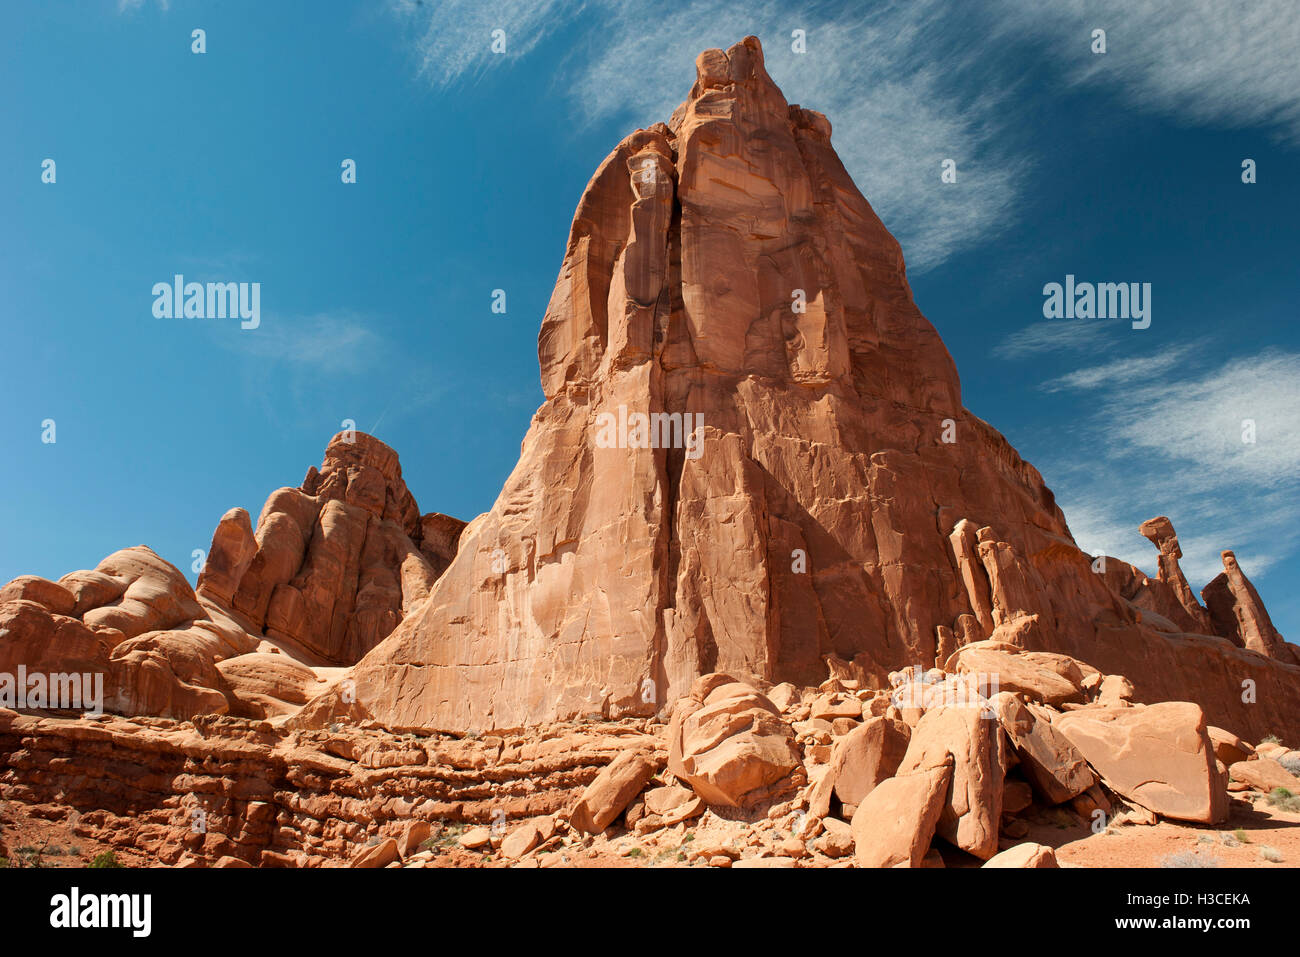 Rock formation in Arches National Park, Utah, USA Stock Photo